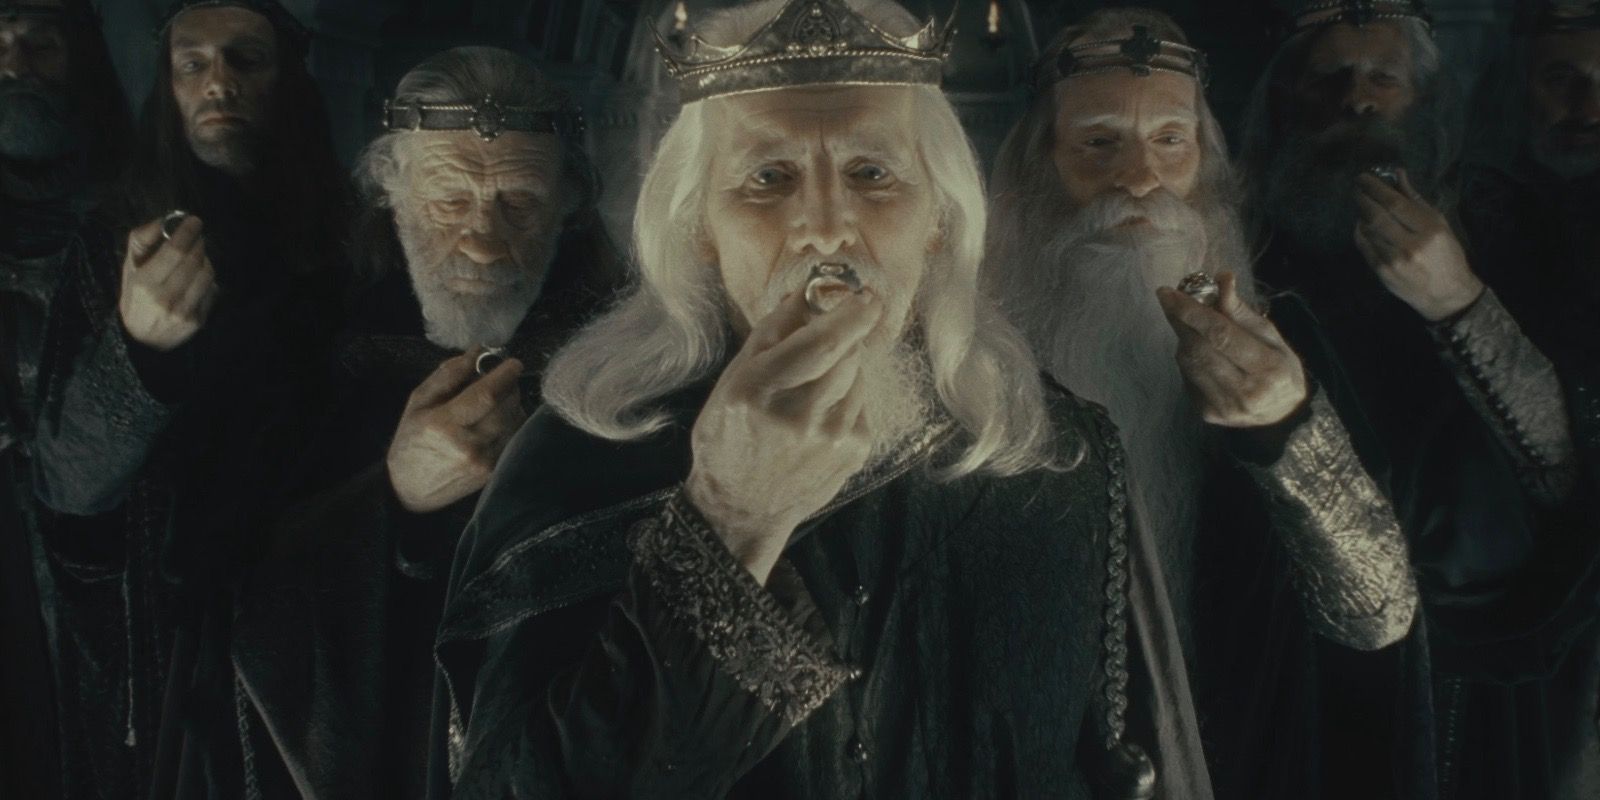 The Rings of Power the Lord of the Rings The Fellowship of the Ring Nazgul